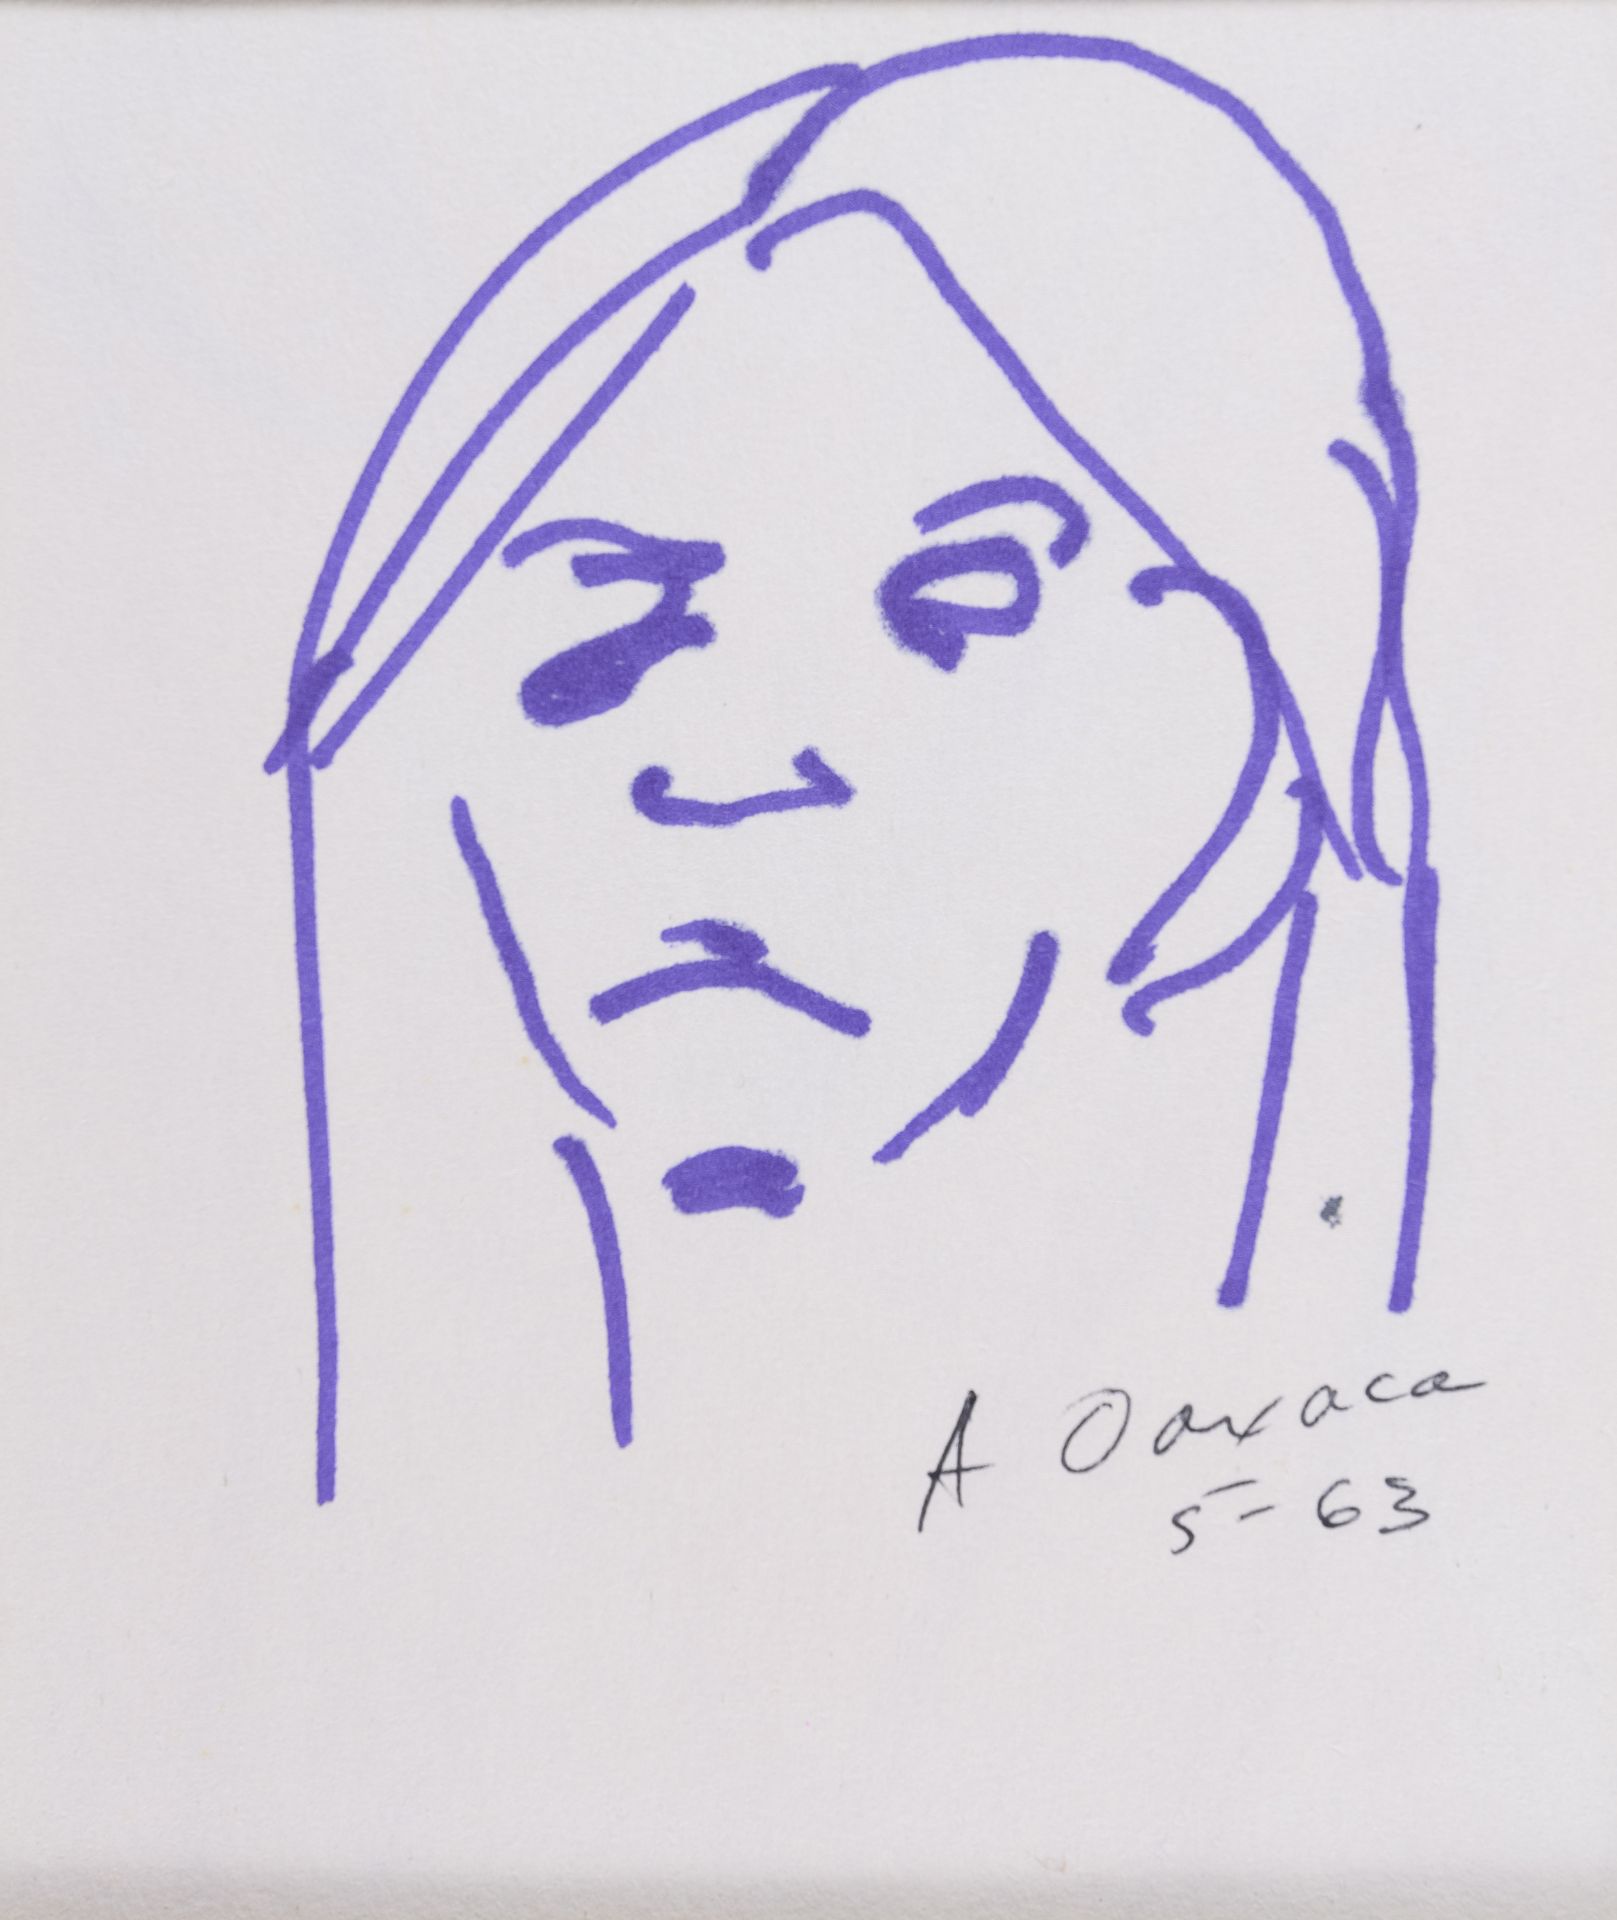 FELT PEN DRAWING OF A FEMALE FACE BY ANTHONY QUINN 1983